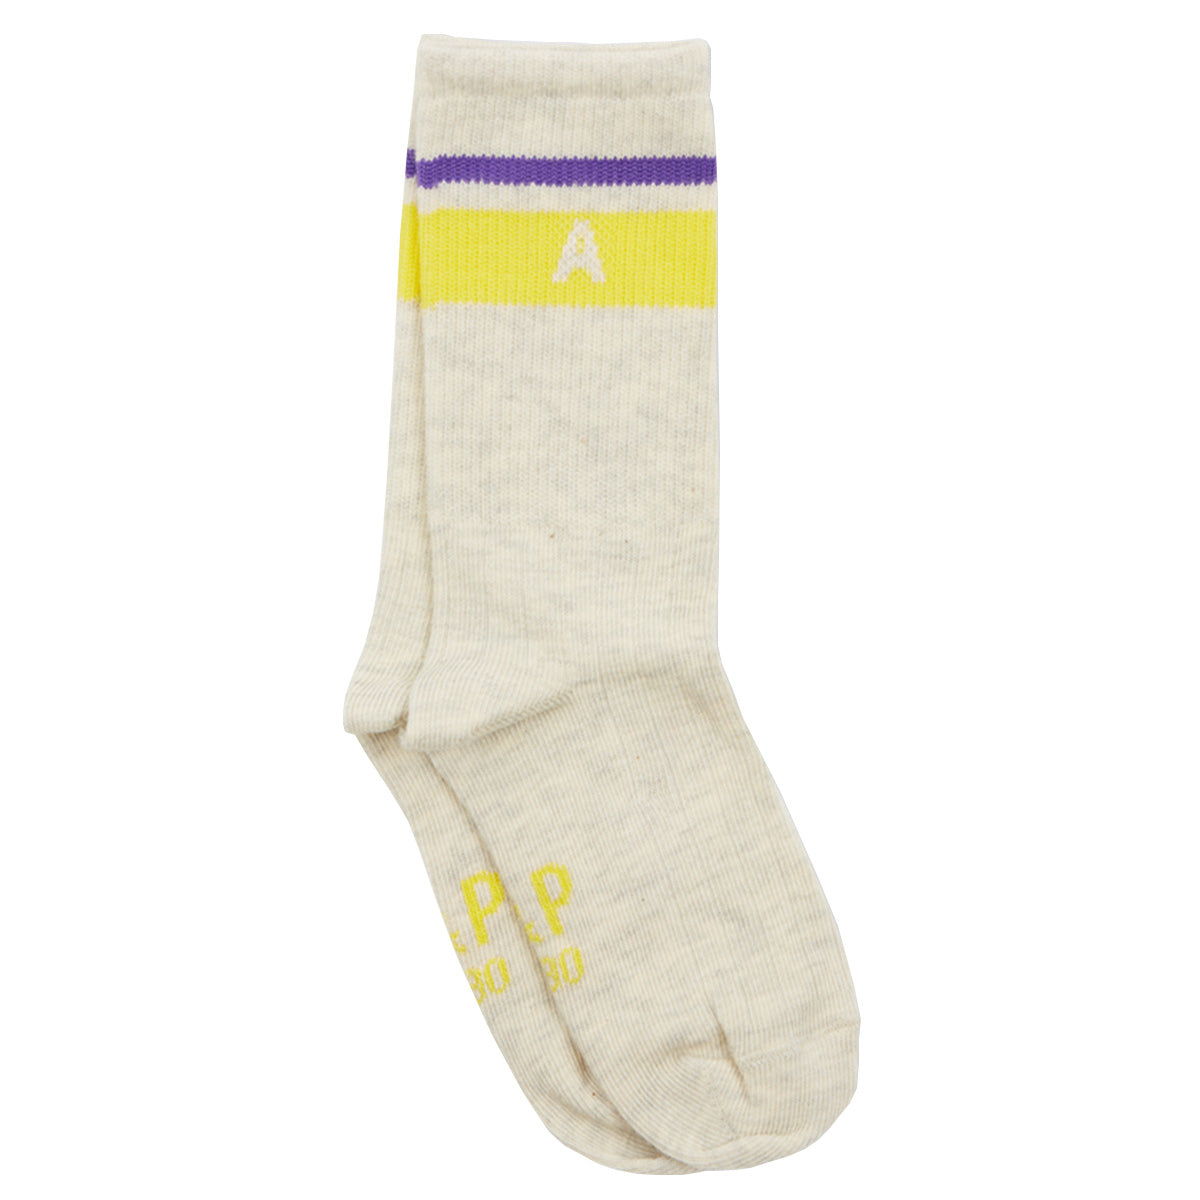 The Child Socks After Scratches from Arsene et Les Pipelettes. Colorblock children's socks